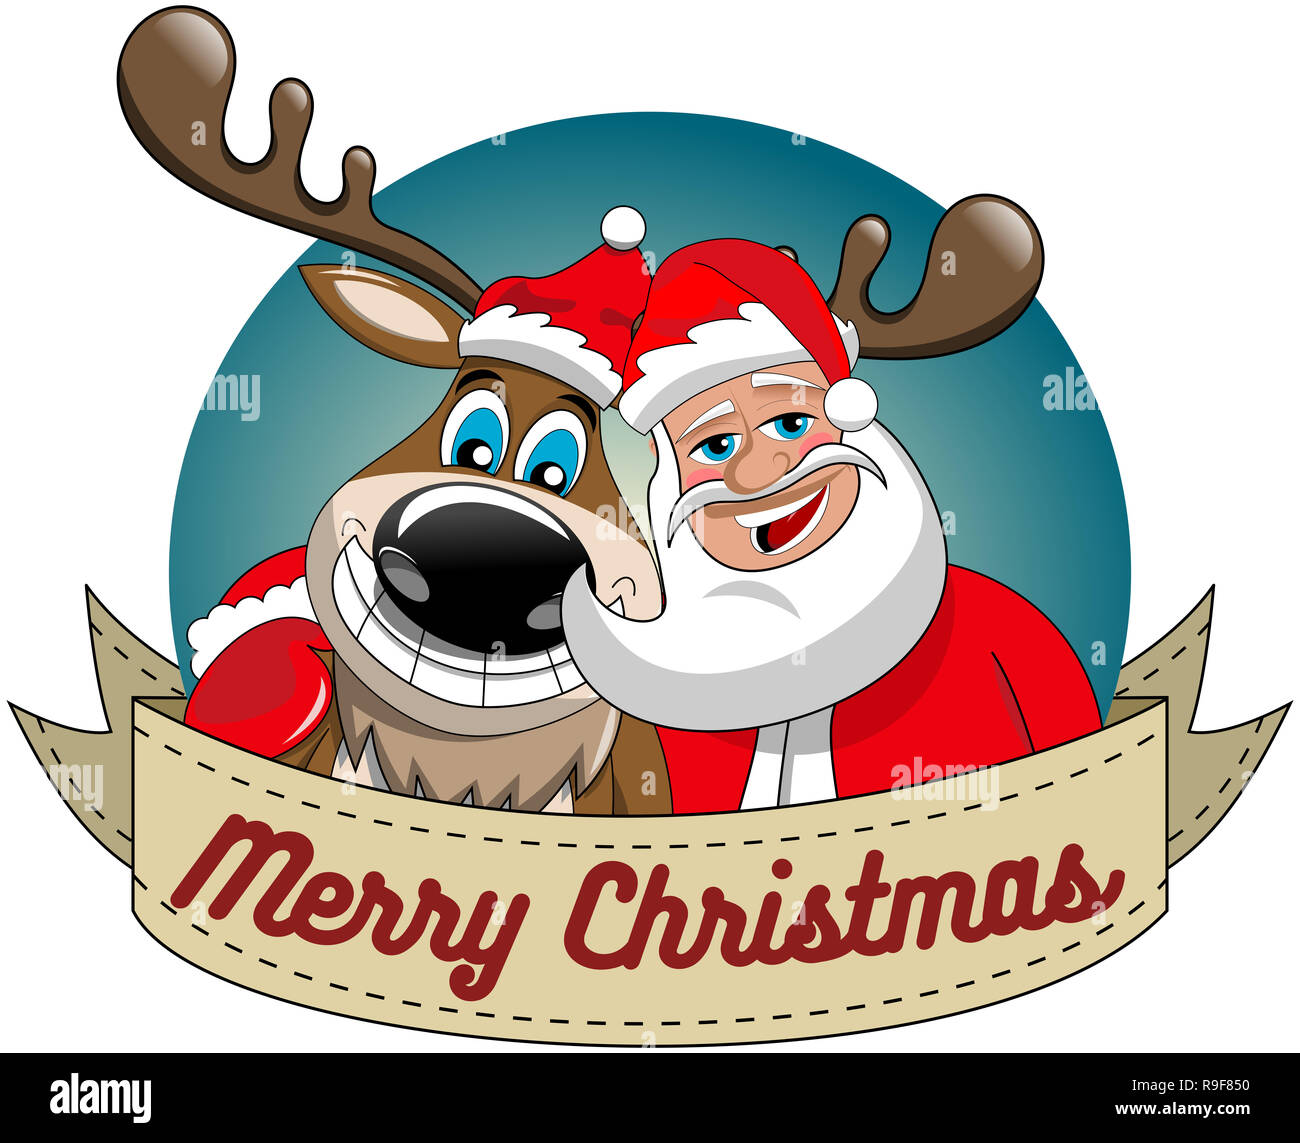 Cartoon funny reindeer and santa claus hugging and wishing merry christmas  in round frame isolated Stock Photo - Alamy